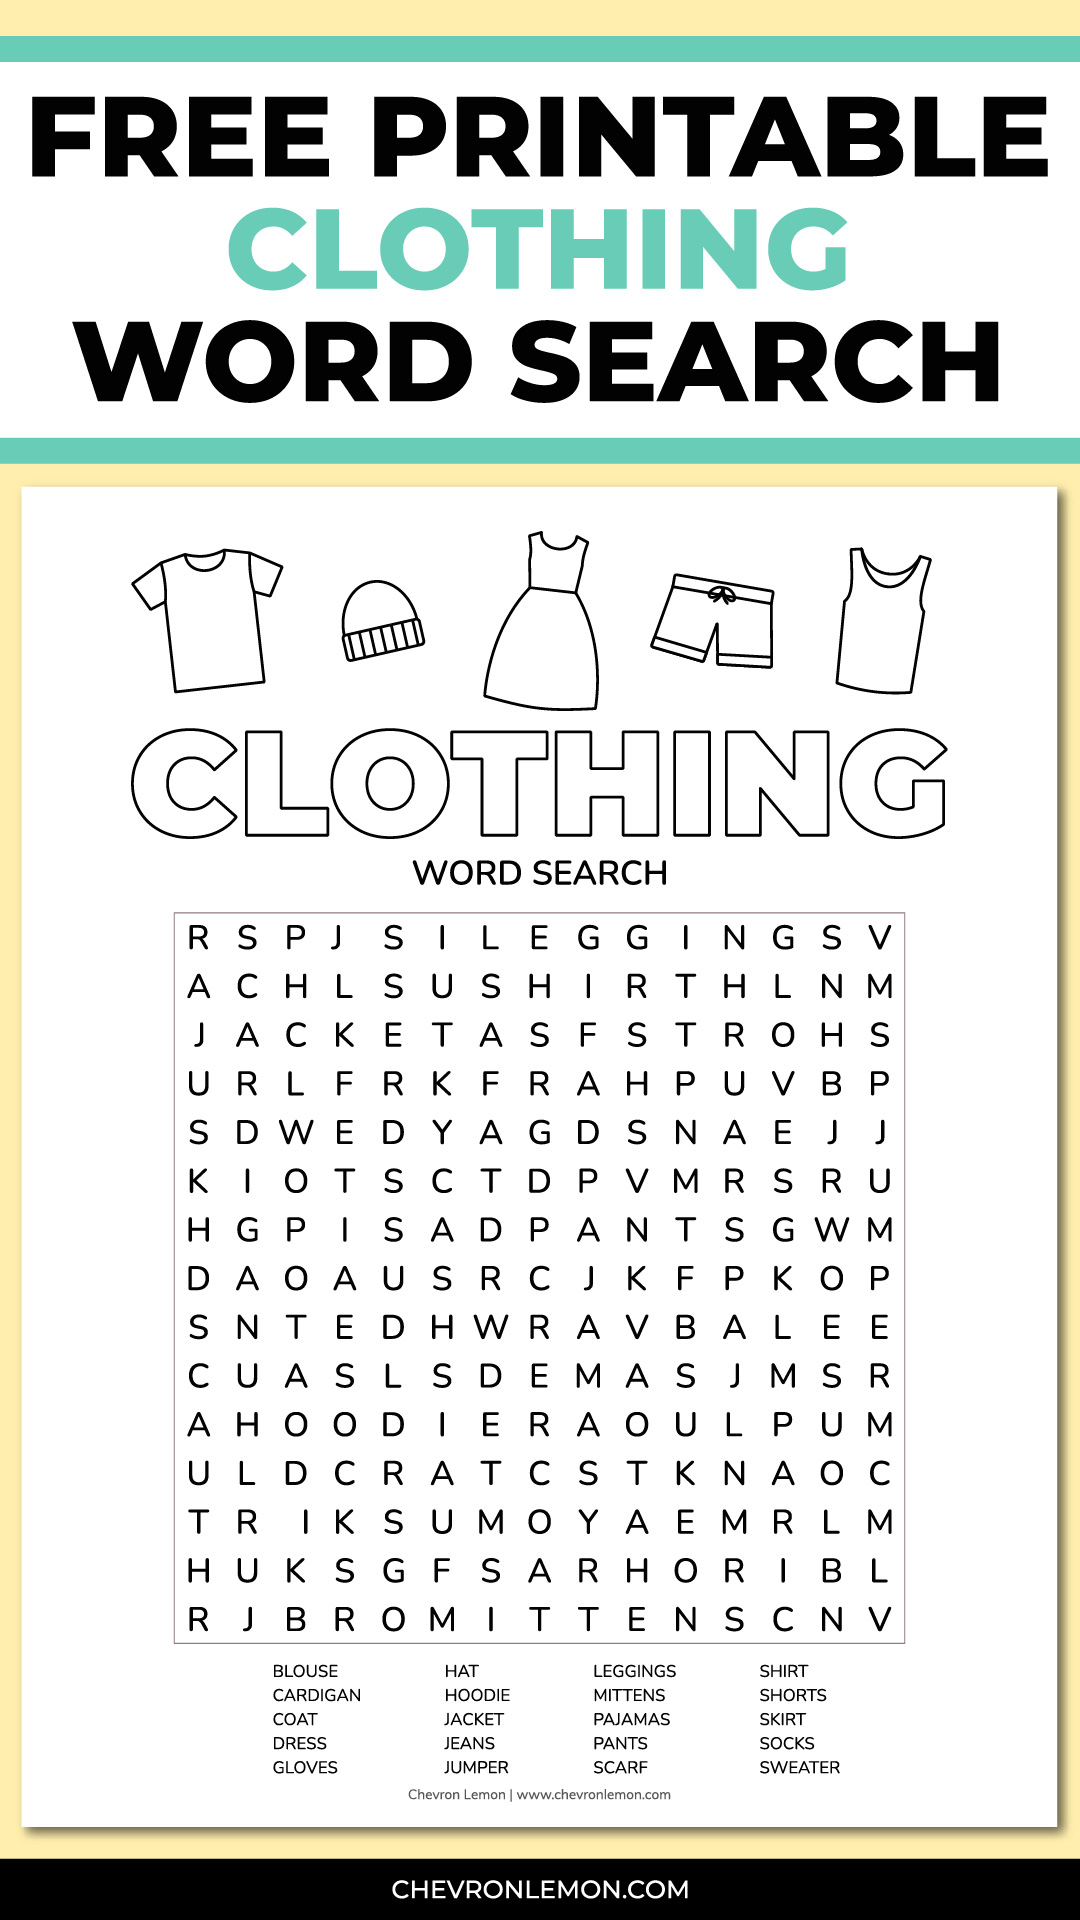 Clothing word search